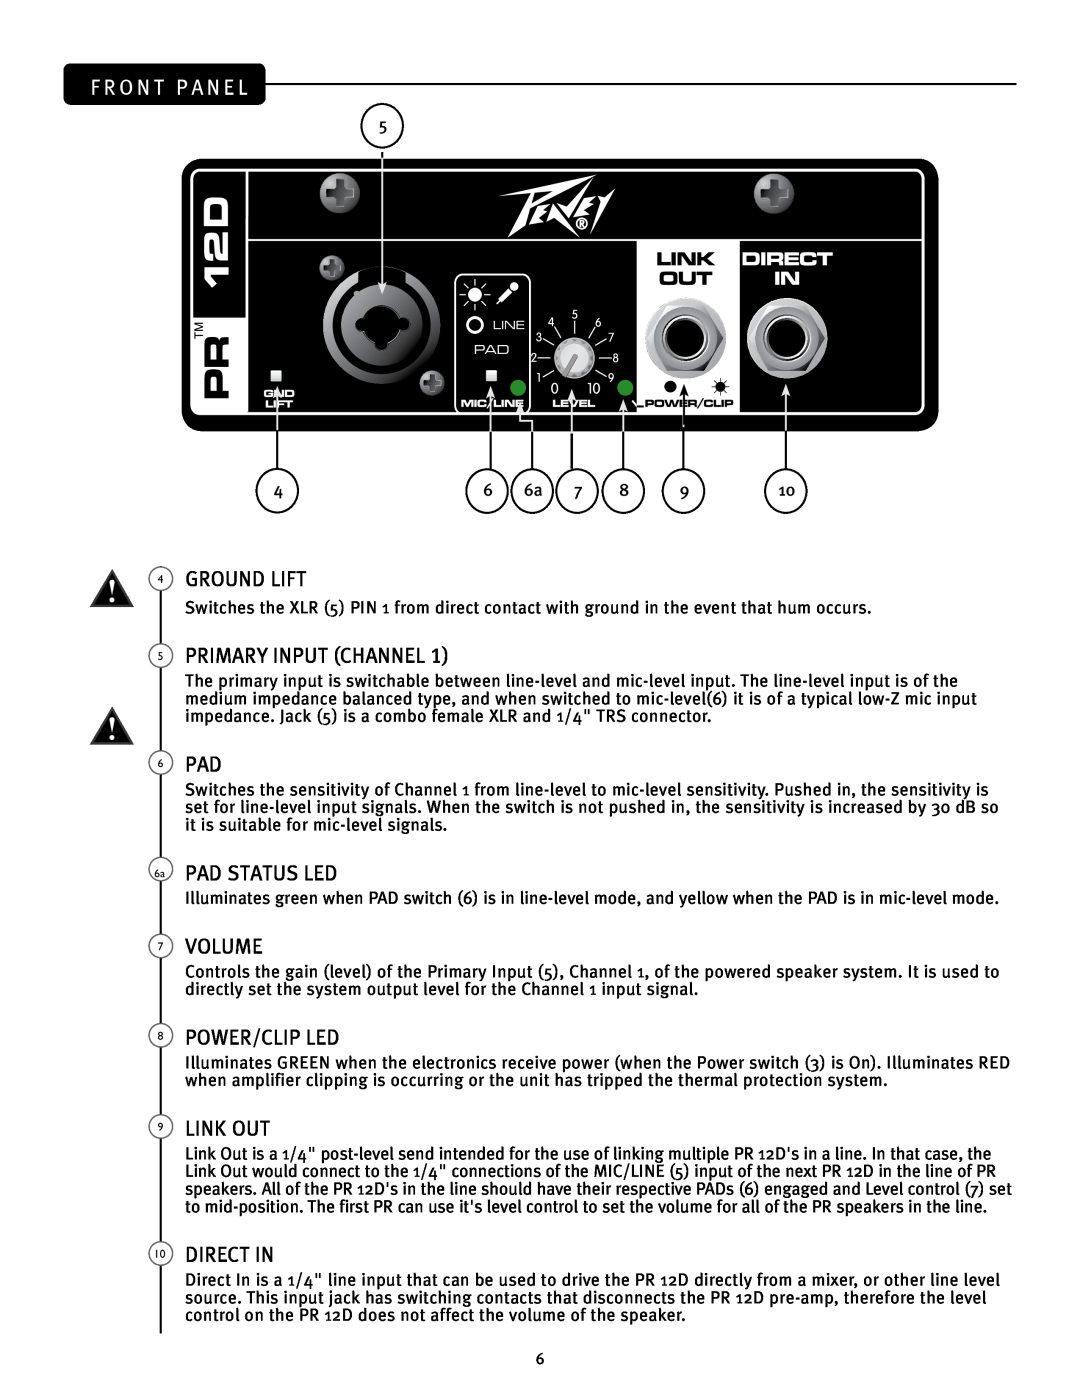 Peavey 12 D manual 4GROUND LIFT, 5PRIMARY INPUT CHANNEL, Pad Status Led, Volume, 8POWER/CLIP LED, 9LINK OUT, 10DIRECT IN 